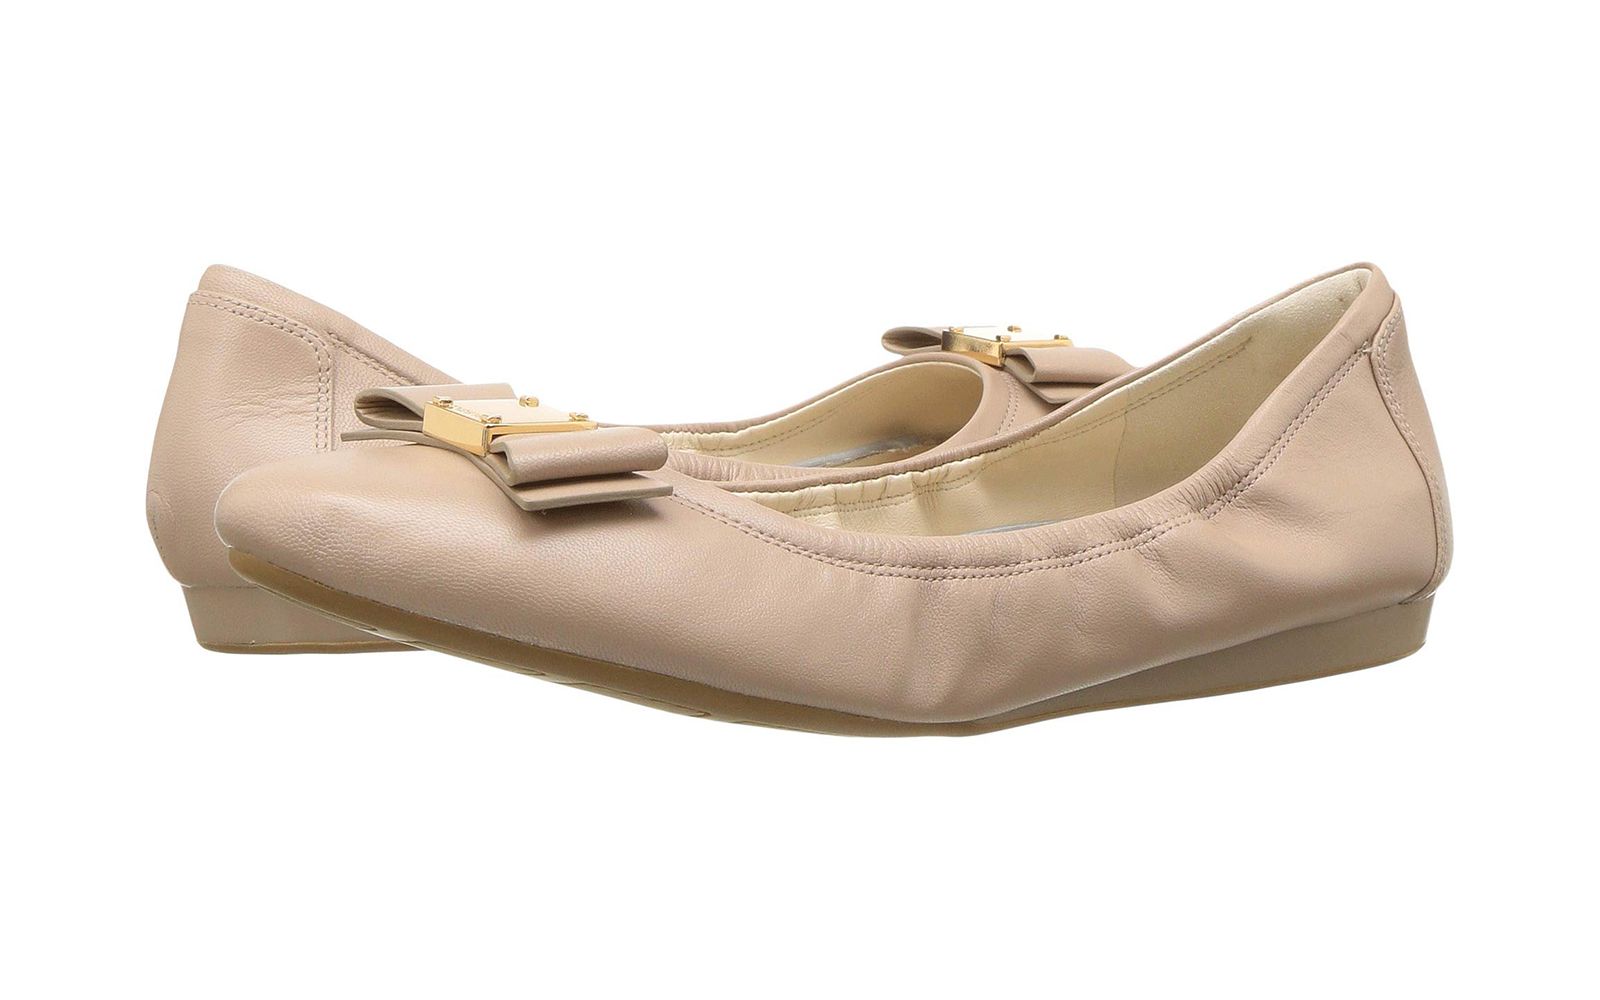 Cole Haan Tali Bow Ballet Flat